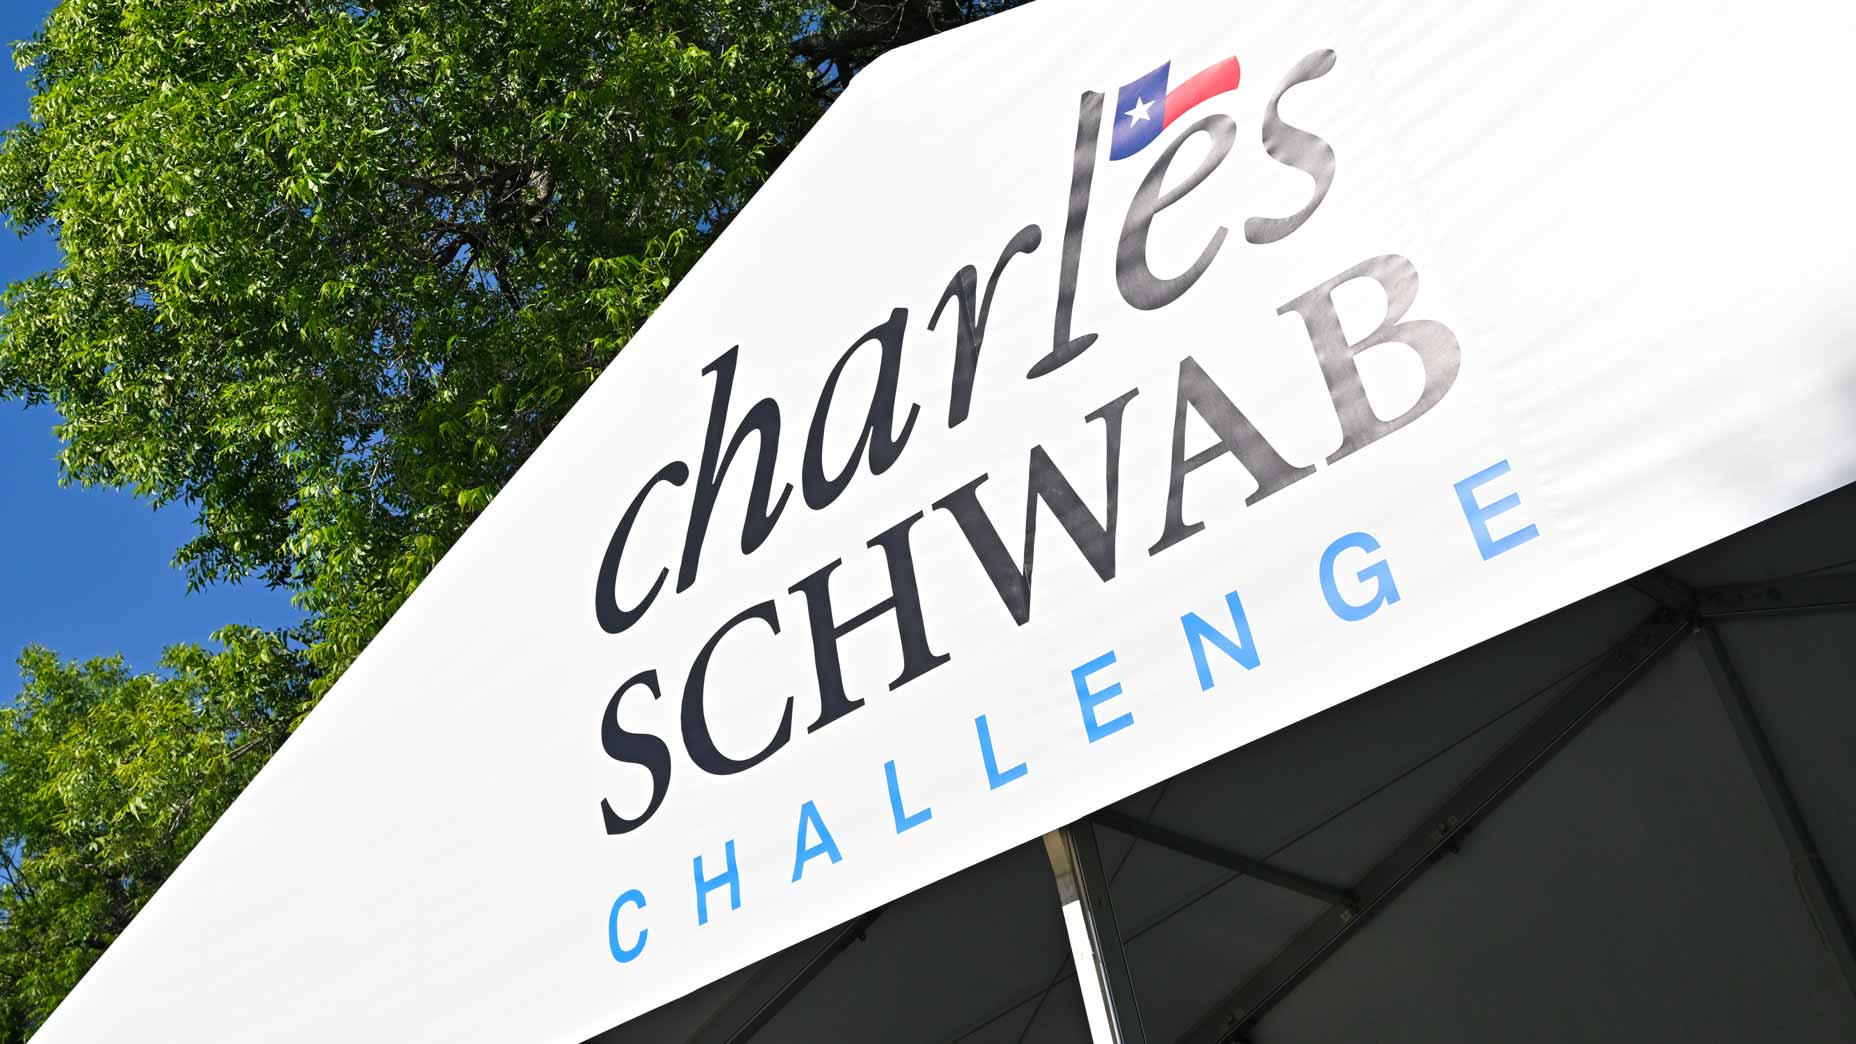 A Charles Schwab Challenge sign pictured on a tournament tent at Colonial